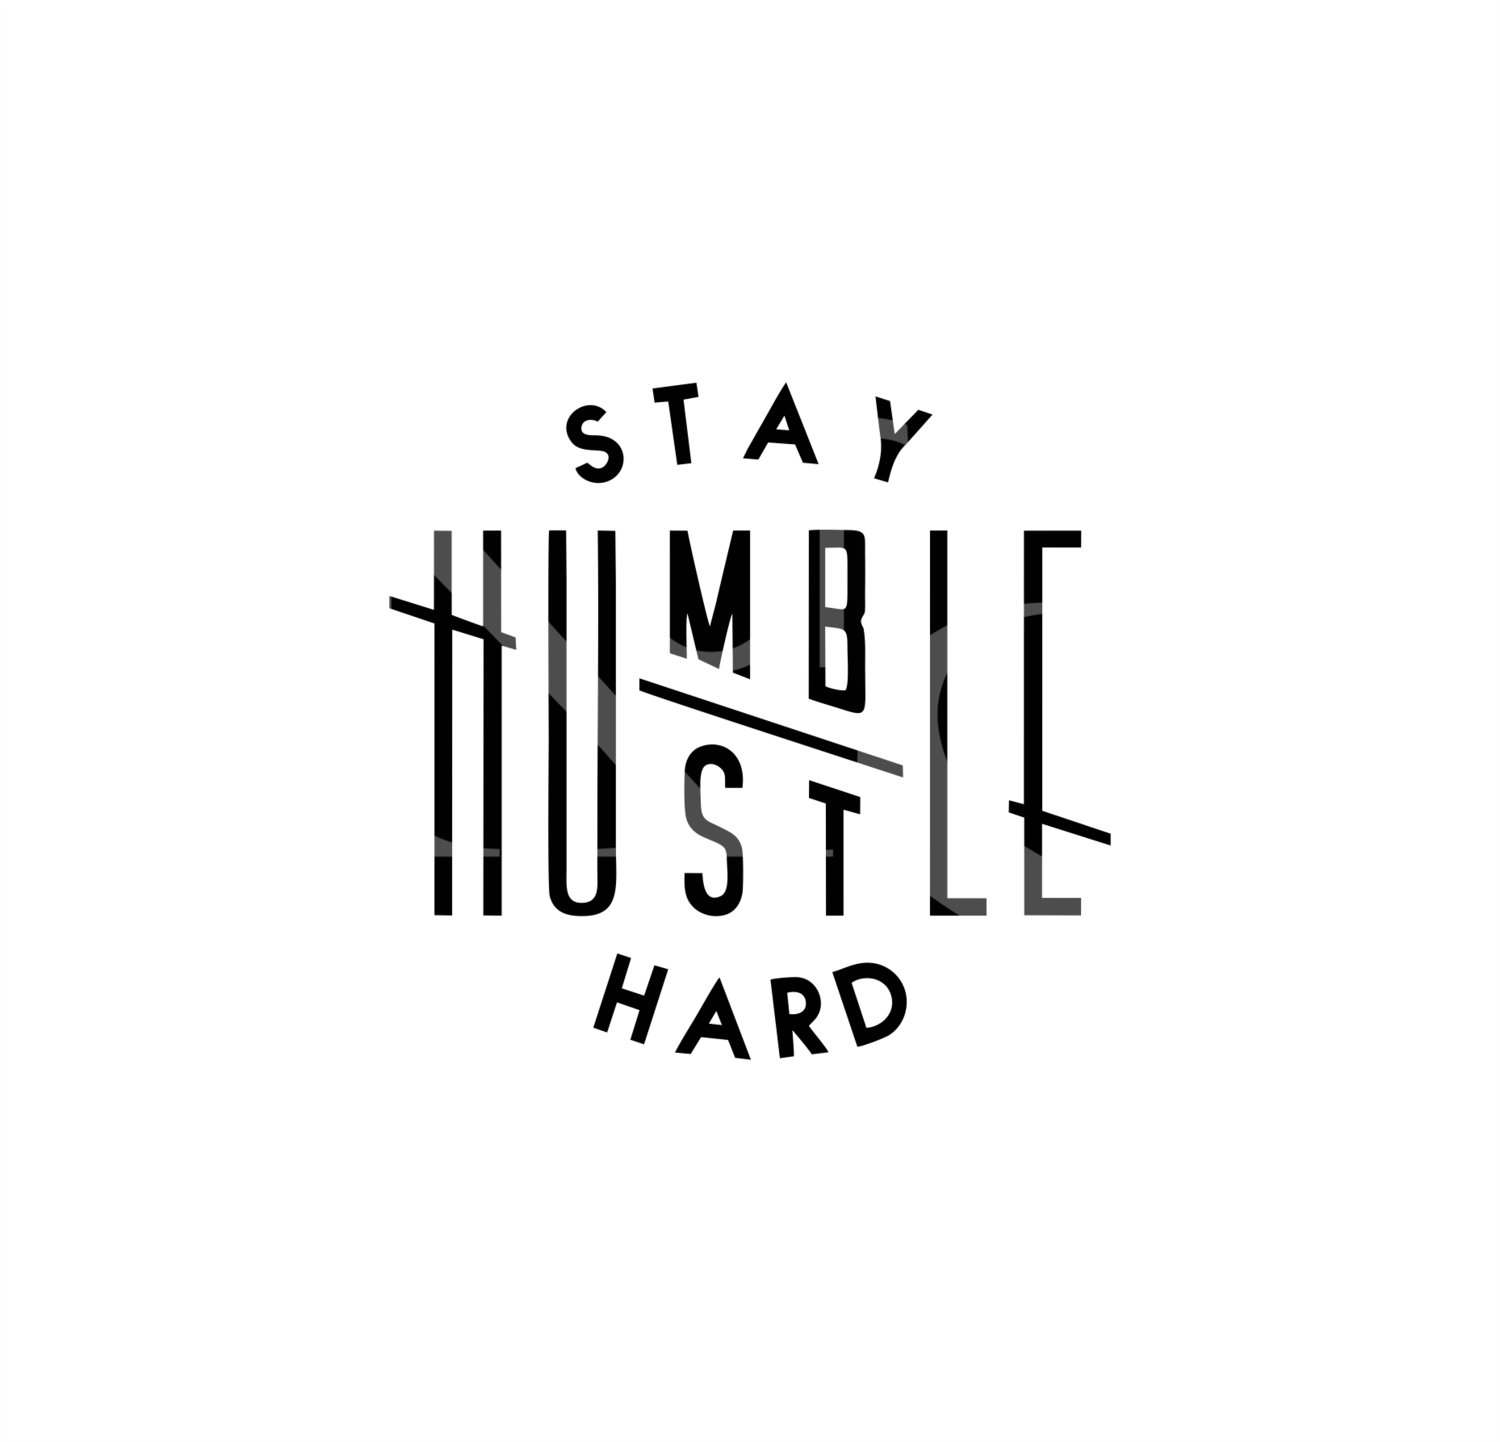 Stay humble hustle hard SVG cut file boss t-shirts Silhouette Cricut SVG Digital file Quote svg Saying Clip art Vector DXF Png Eps